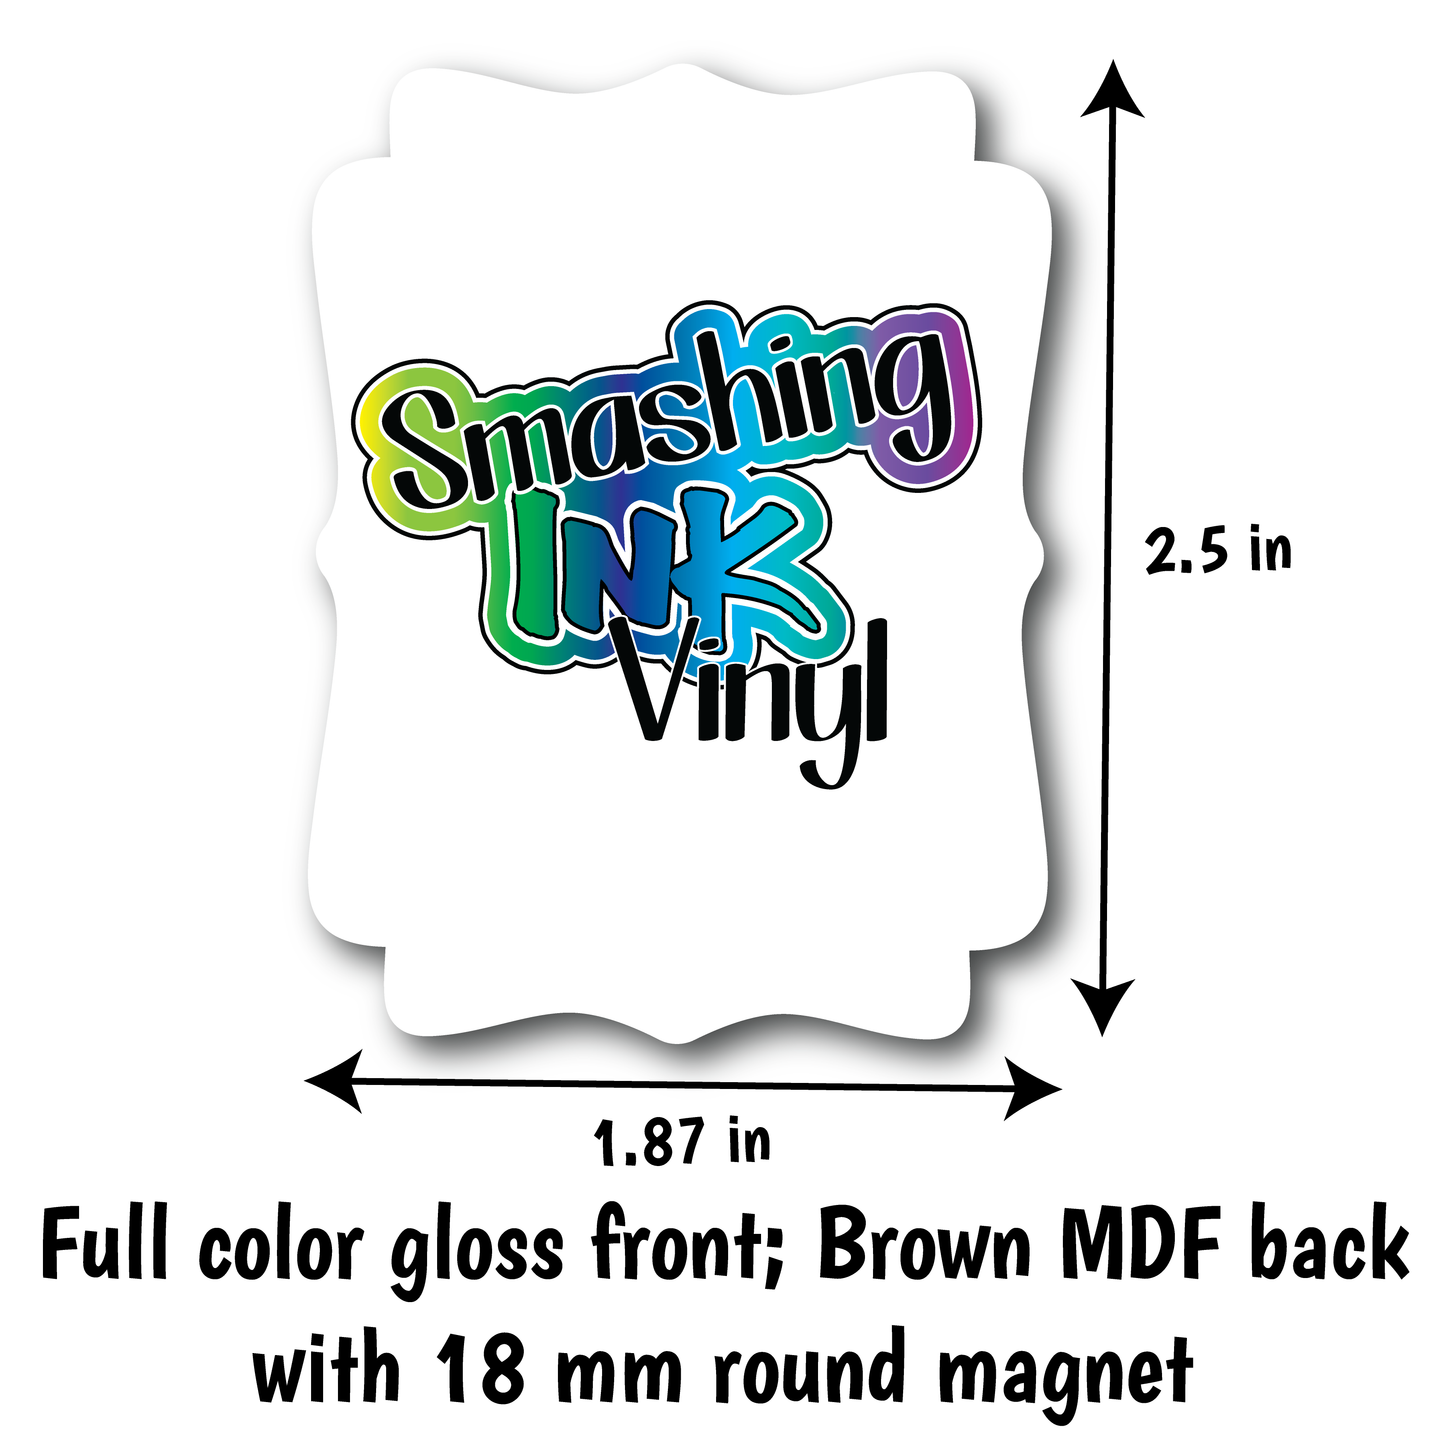 Shelley Russets - Full Color Magnets